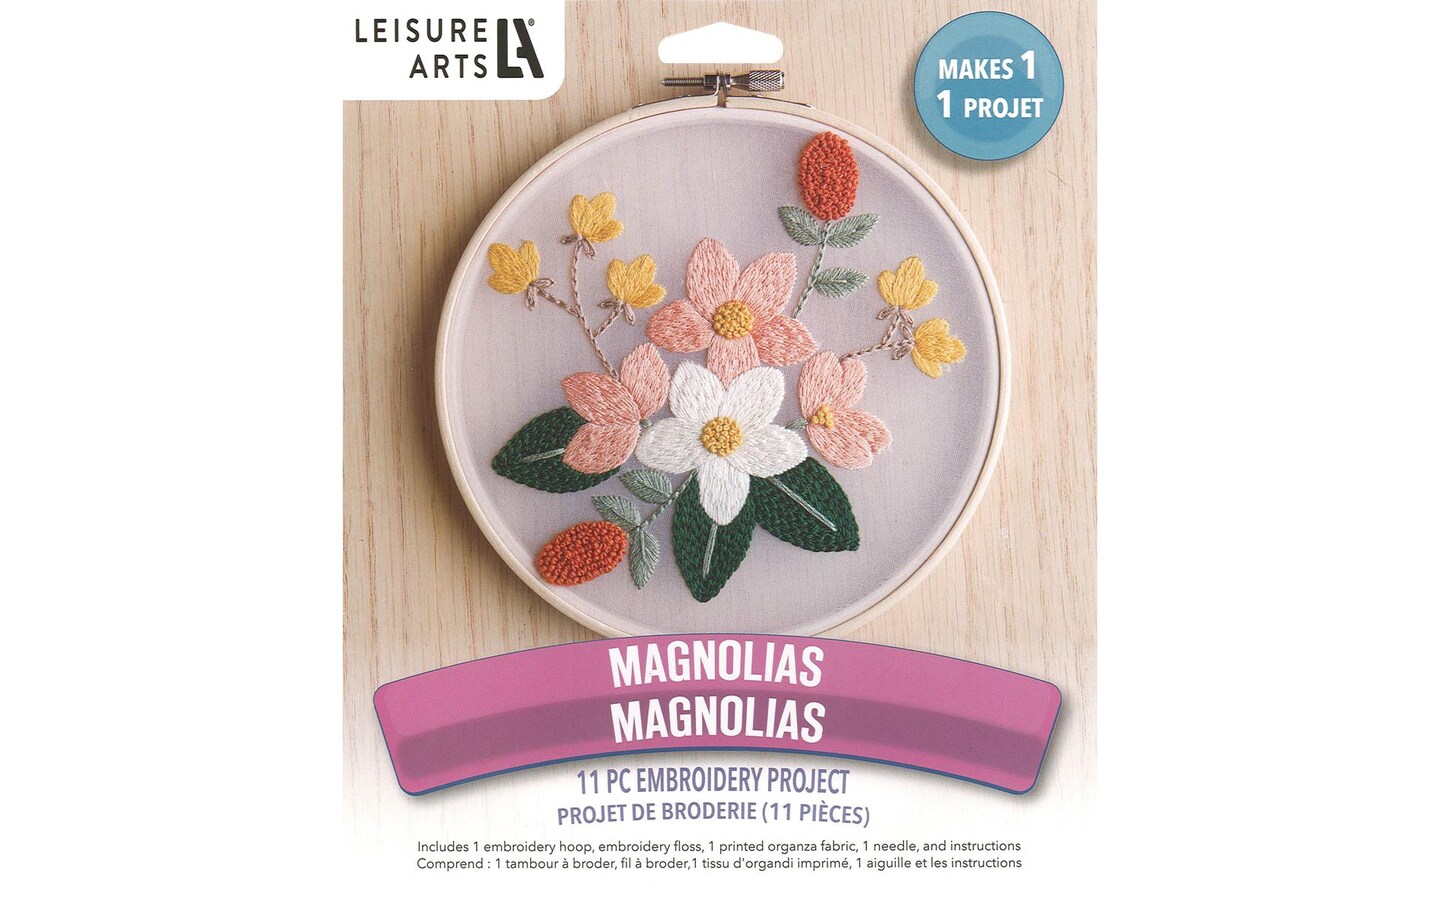 Starter Embroidery Kit for Adults Cross Stitch Kits for Adults